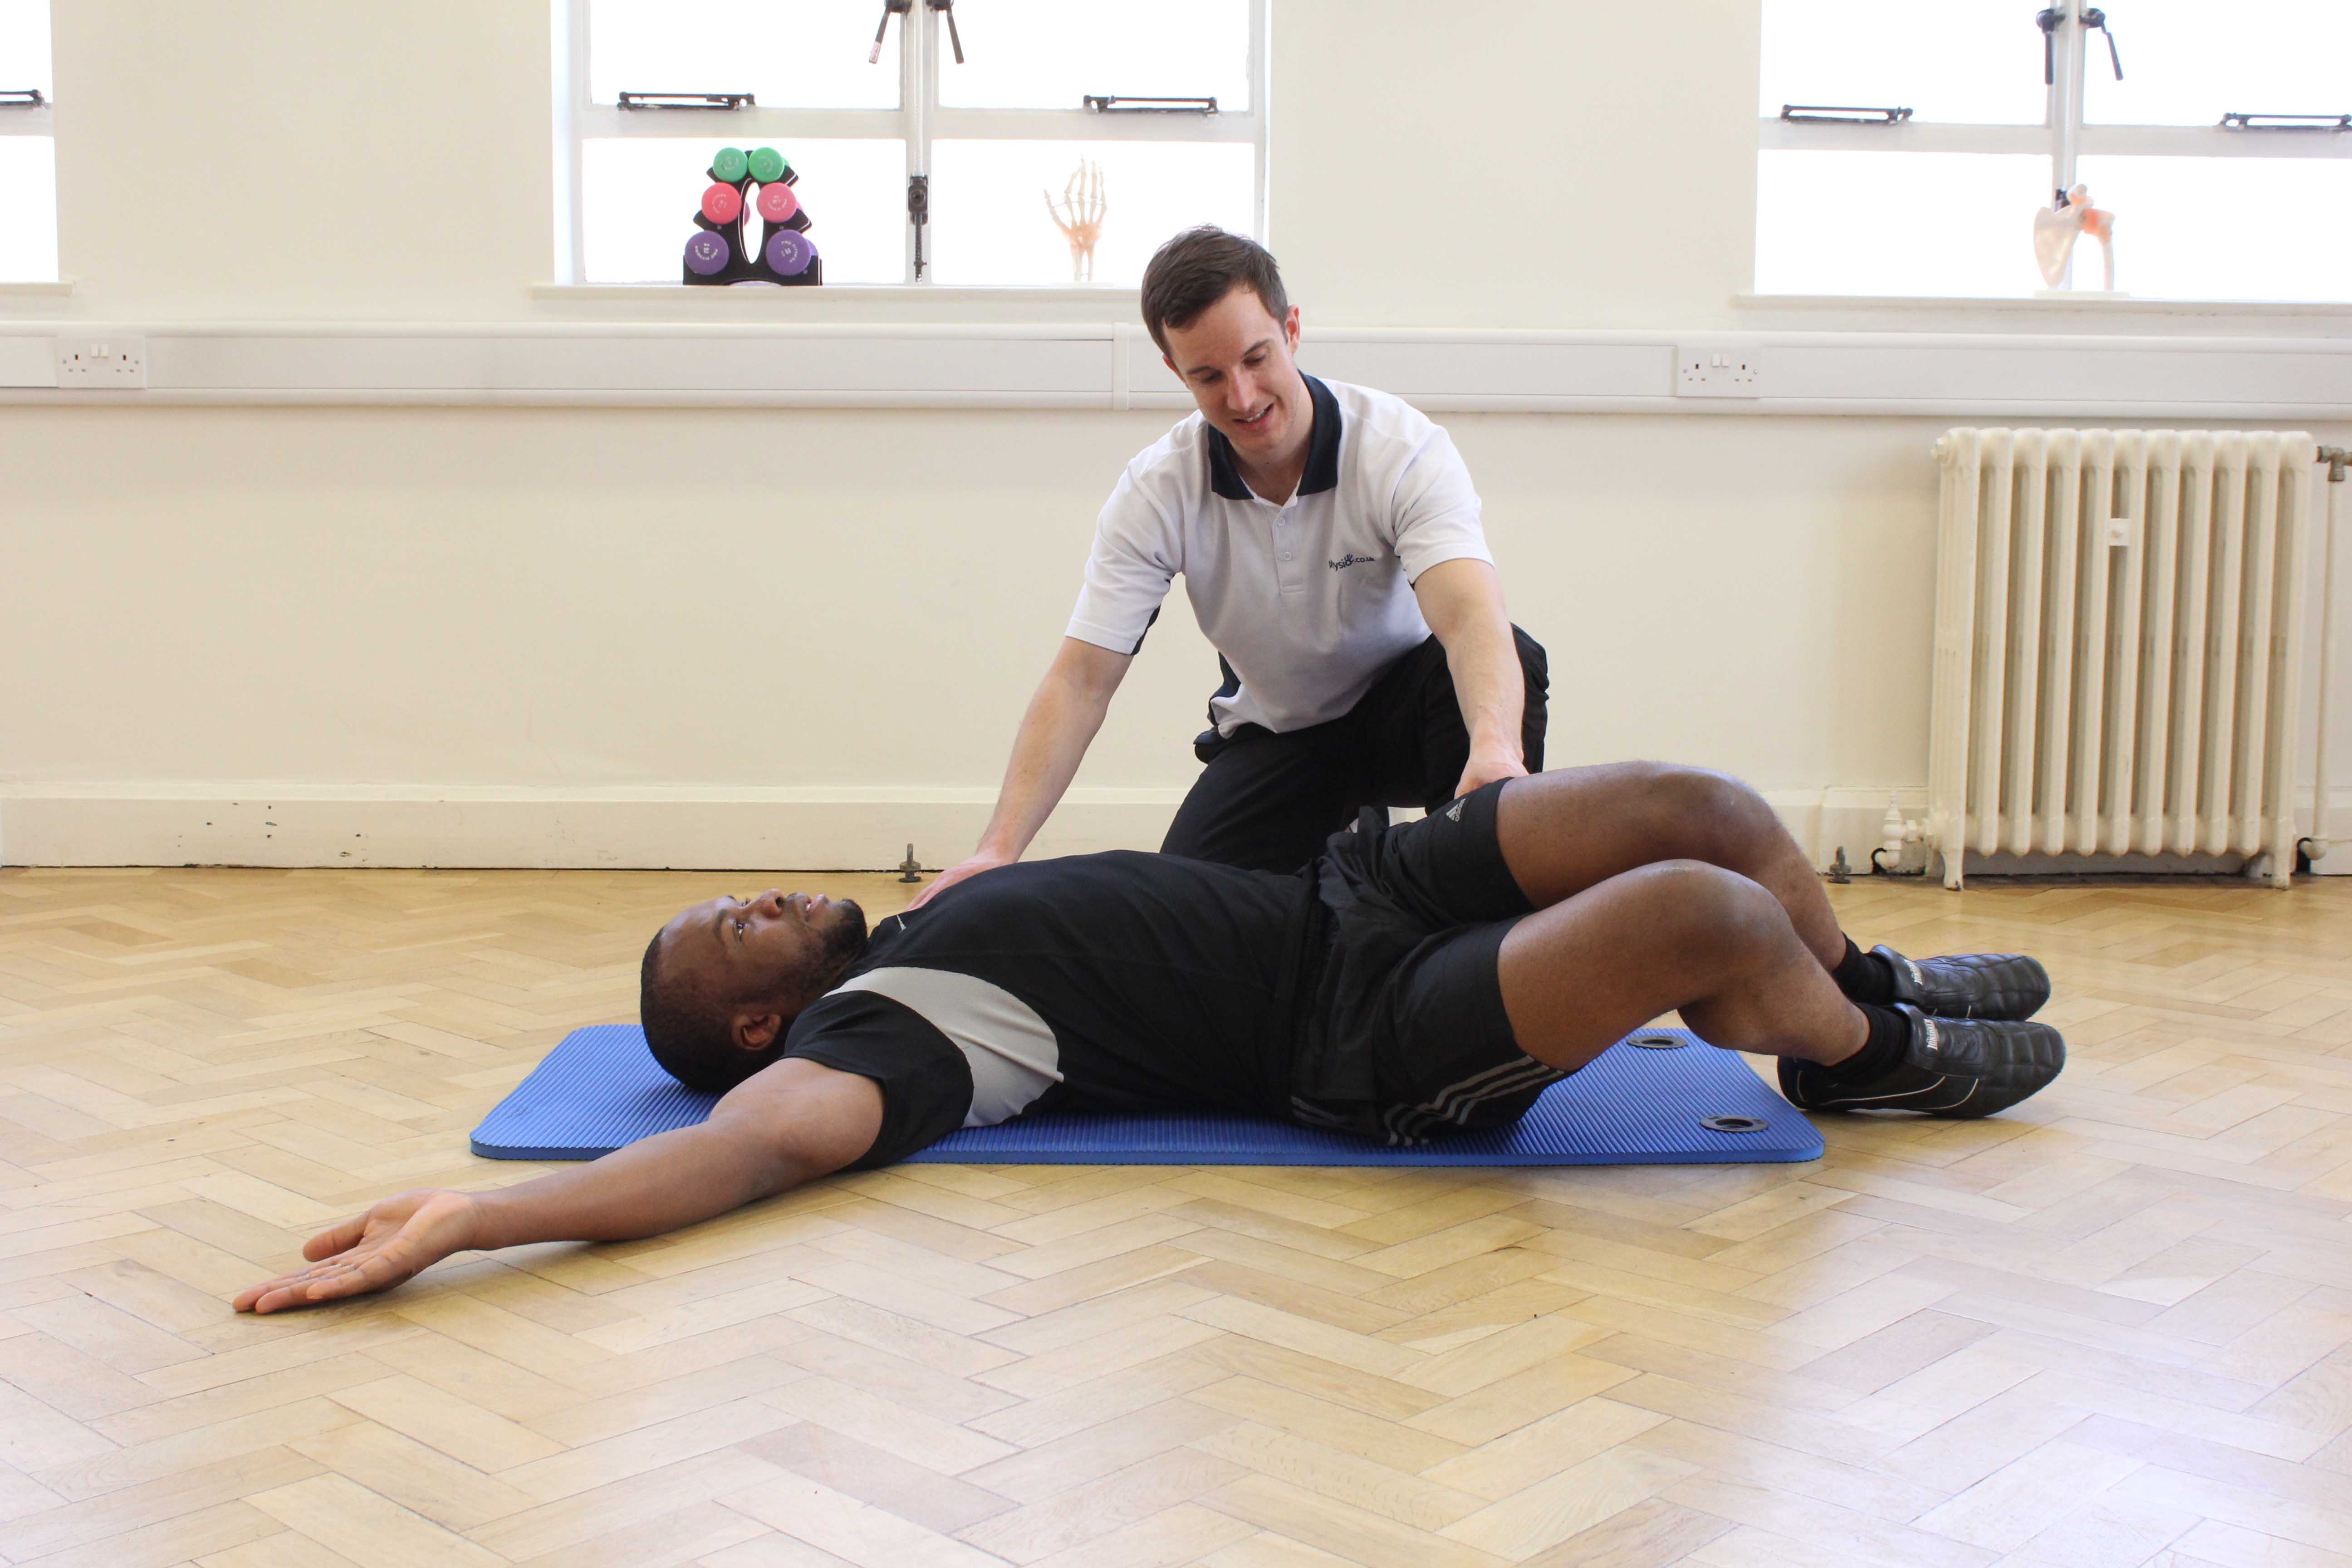 Progressive strengthening hip exercises supervised by experienced therapist